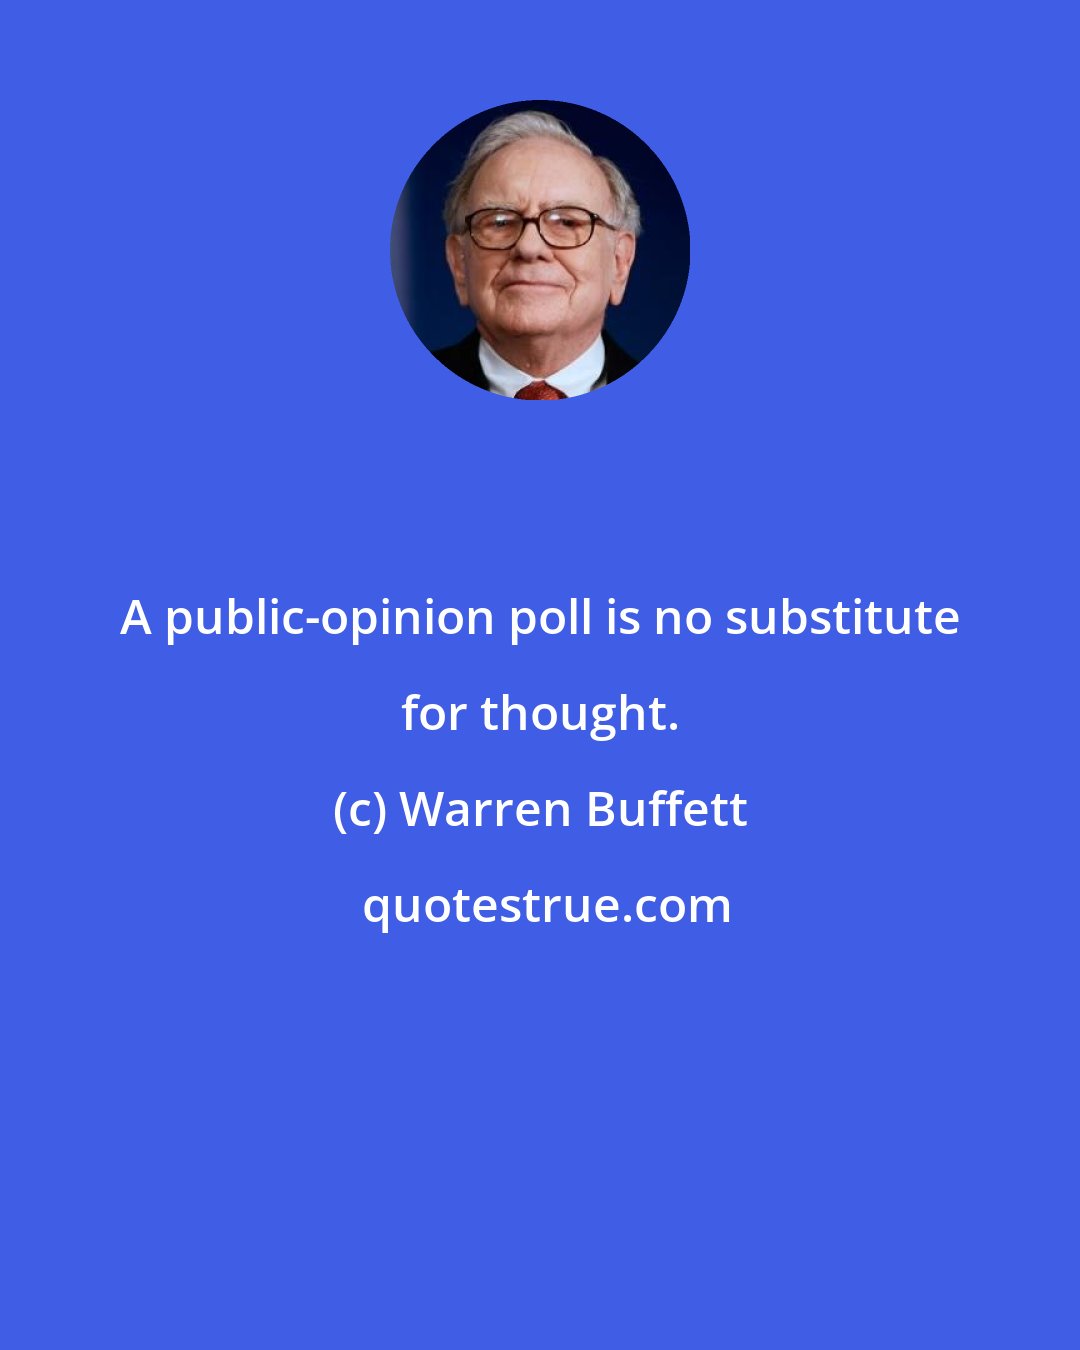 Warren Buffett: A public-opinion poll is no substitute for thought.